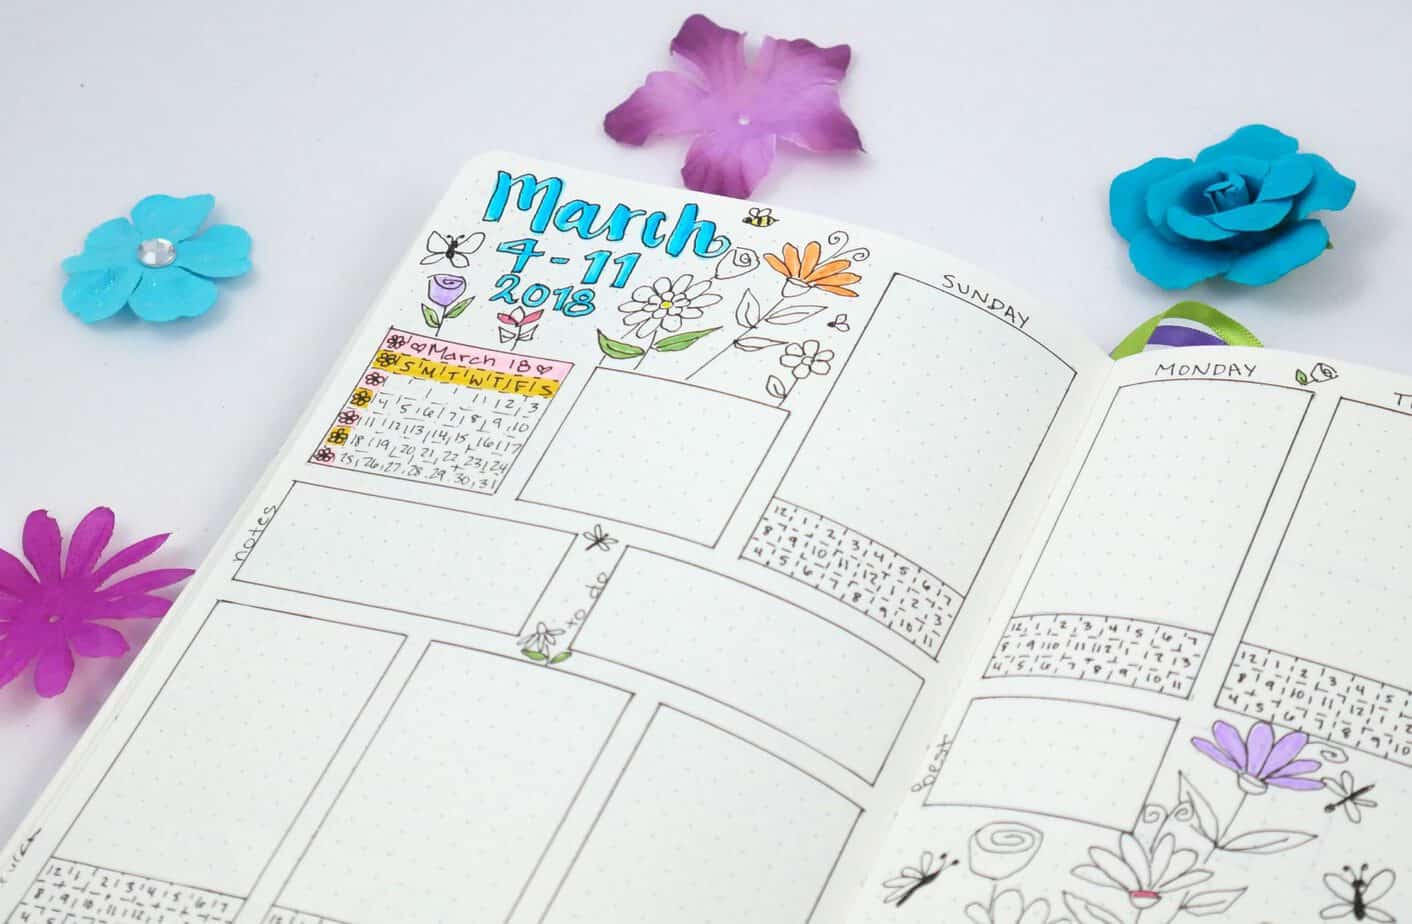 5 Quick Tips to Embrace Your New Bullet Journal